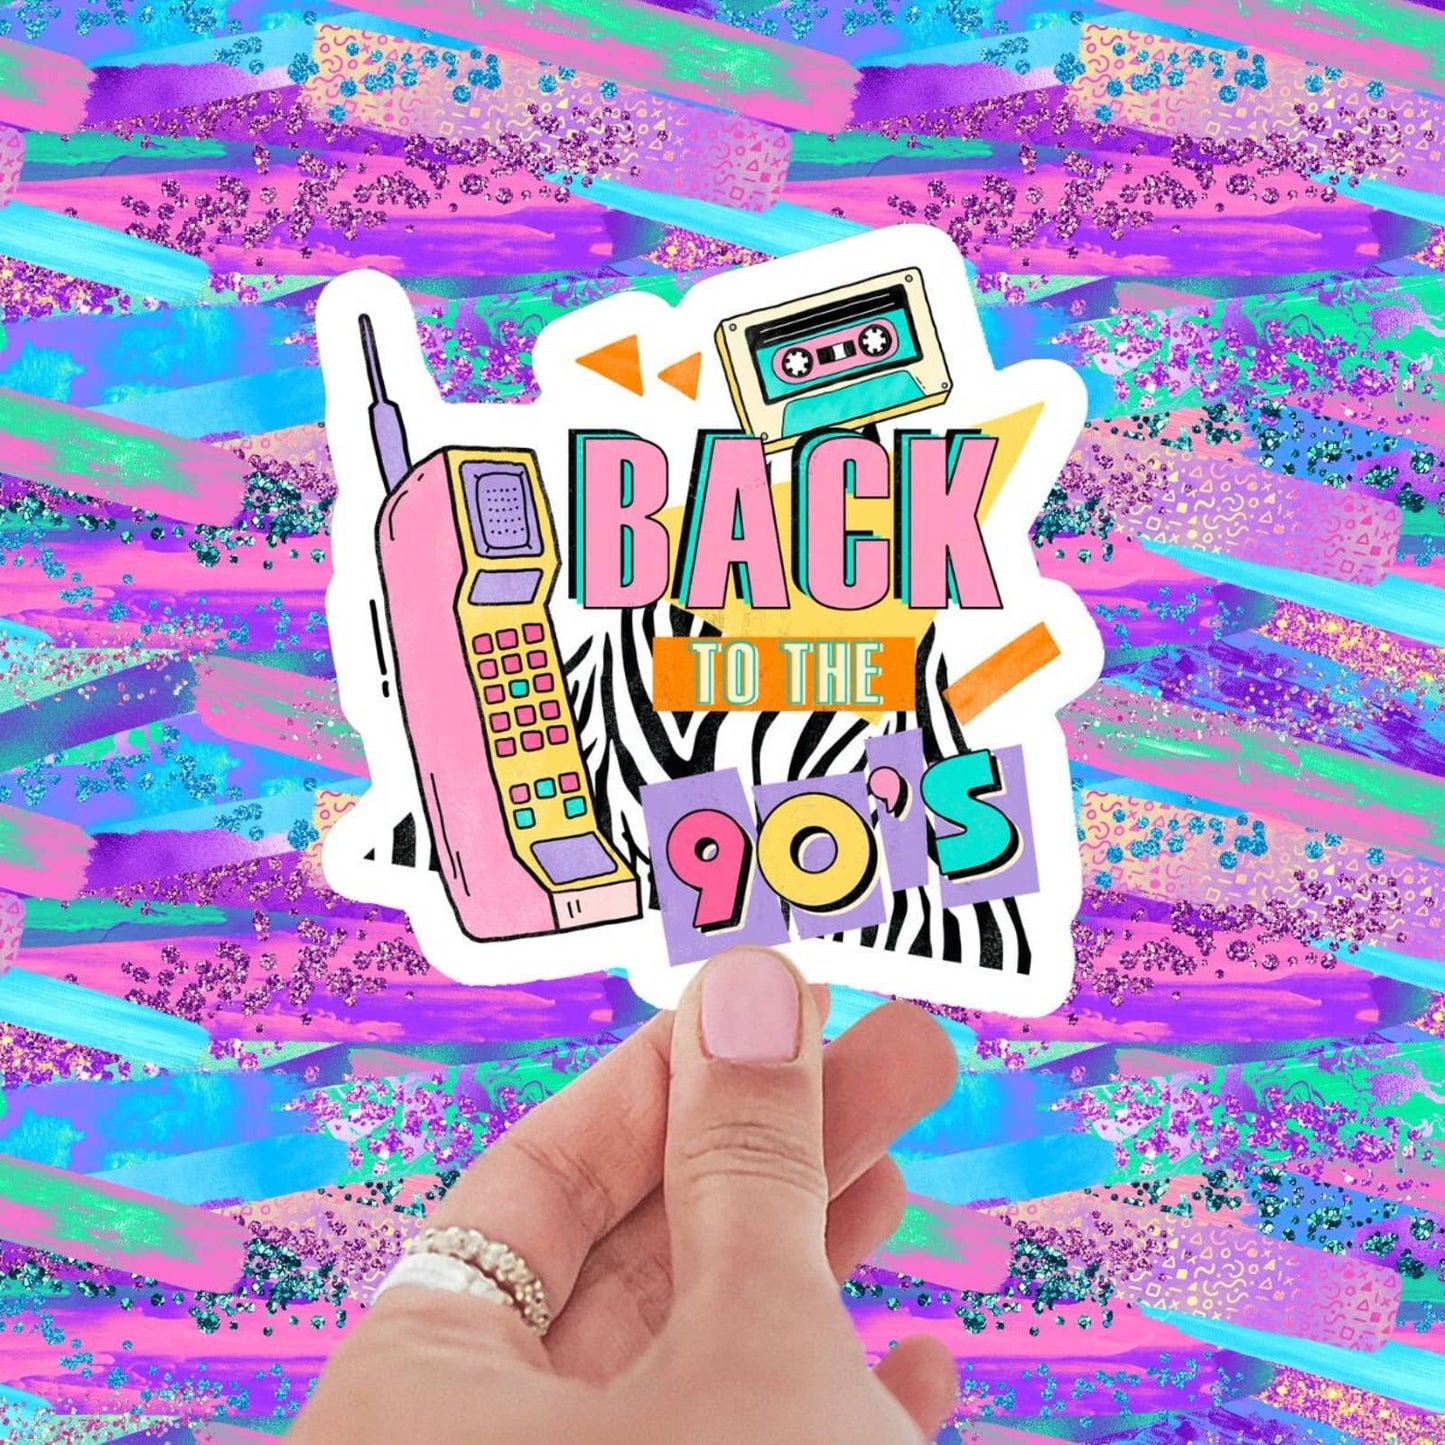 Back To The 90s sticker